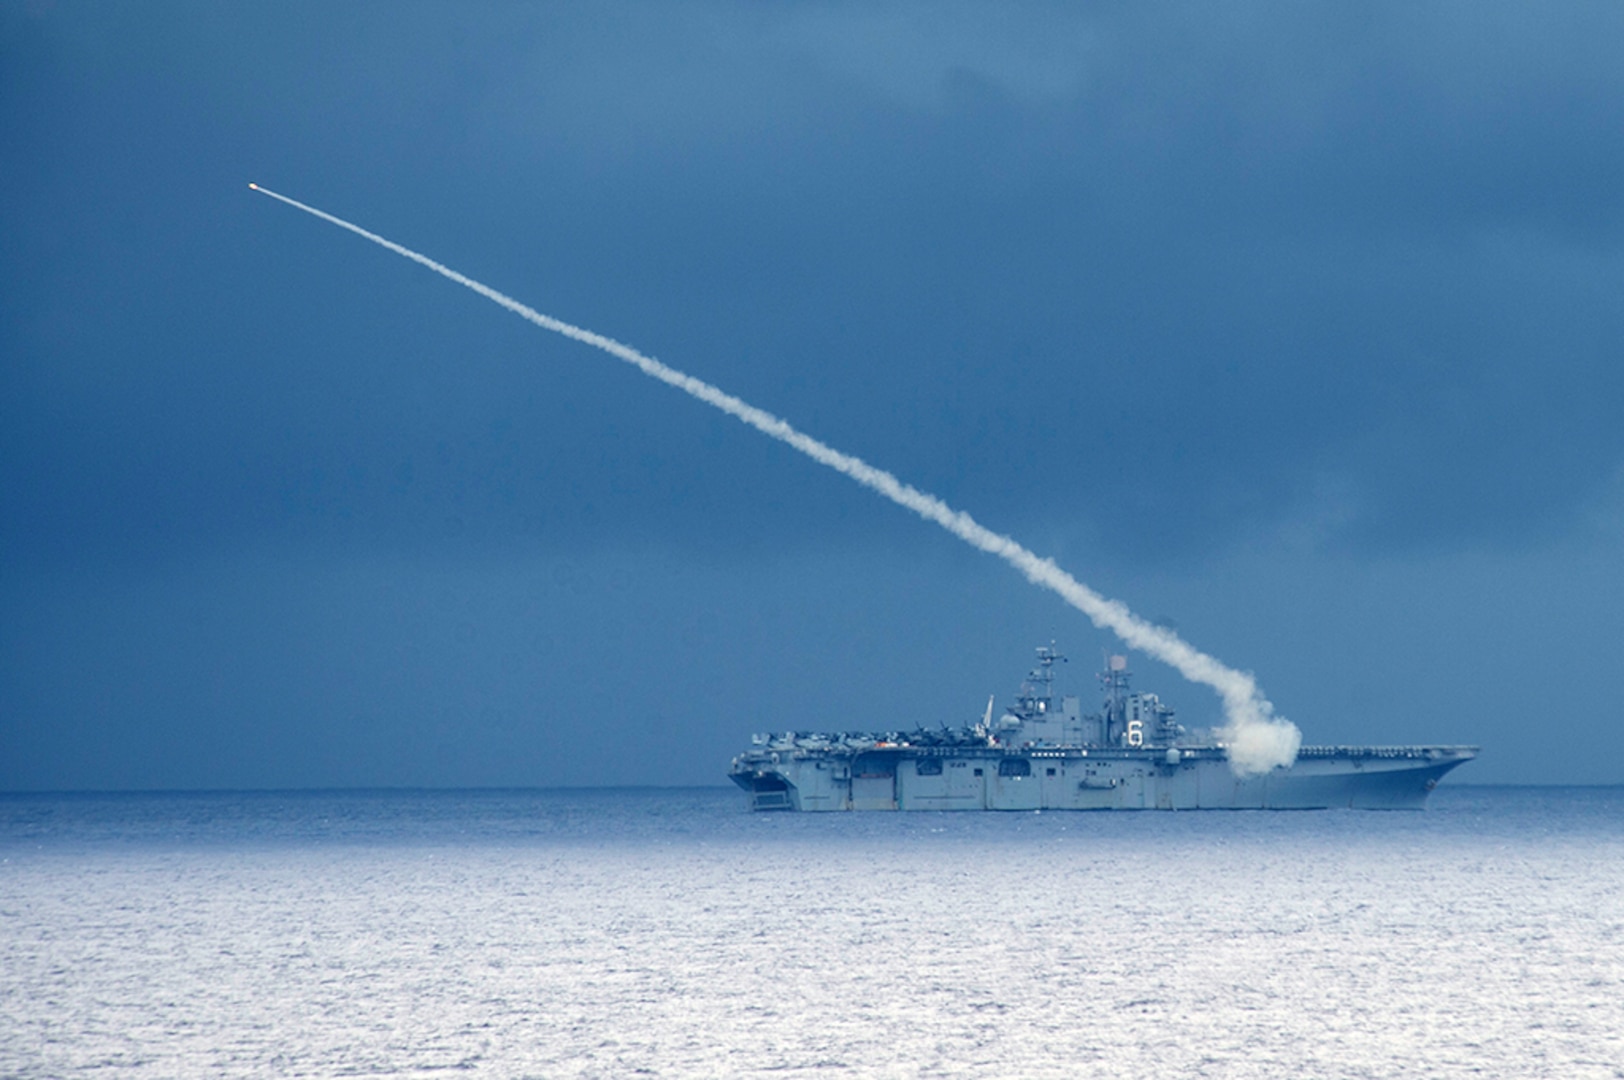 The Wasp-class amphibious assault ship USS Bonhomme Richard (LHD 6) fires a Sea Sparrow missile during a missile exercise during Valiant Shield, Sept. 18, 2016. Valiant Shield 16 is a biennial, U.S.-only, field training exercise (FTX) with a focus on integration of joint training among U.S. forces. Germantown, part of the Bonhomme Richard Expeditionary Strike Group with embarked 31st Marine Expeditionary Unit, is participating in Valiant Shield in an effort to increase naval integration and joint capabilities in the event of conflict, contingency, or disaster relief. 